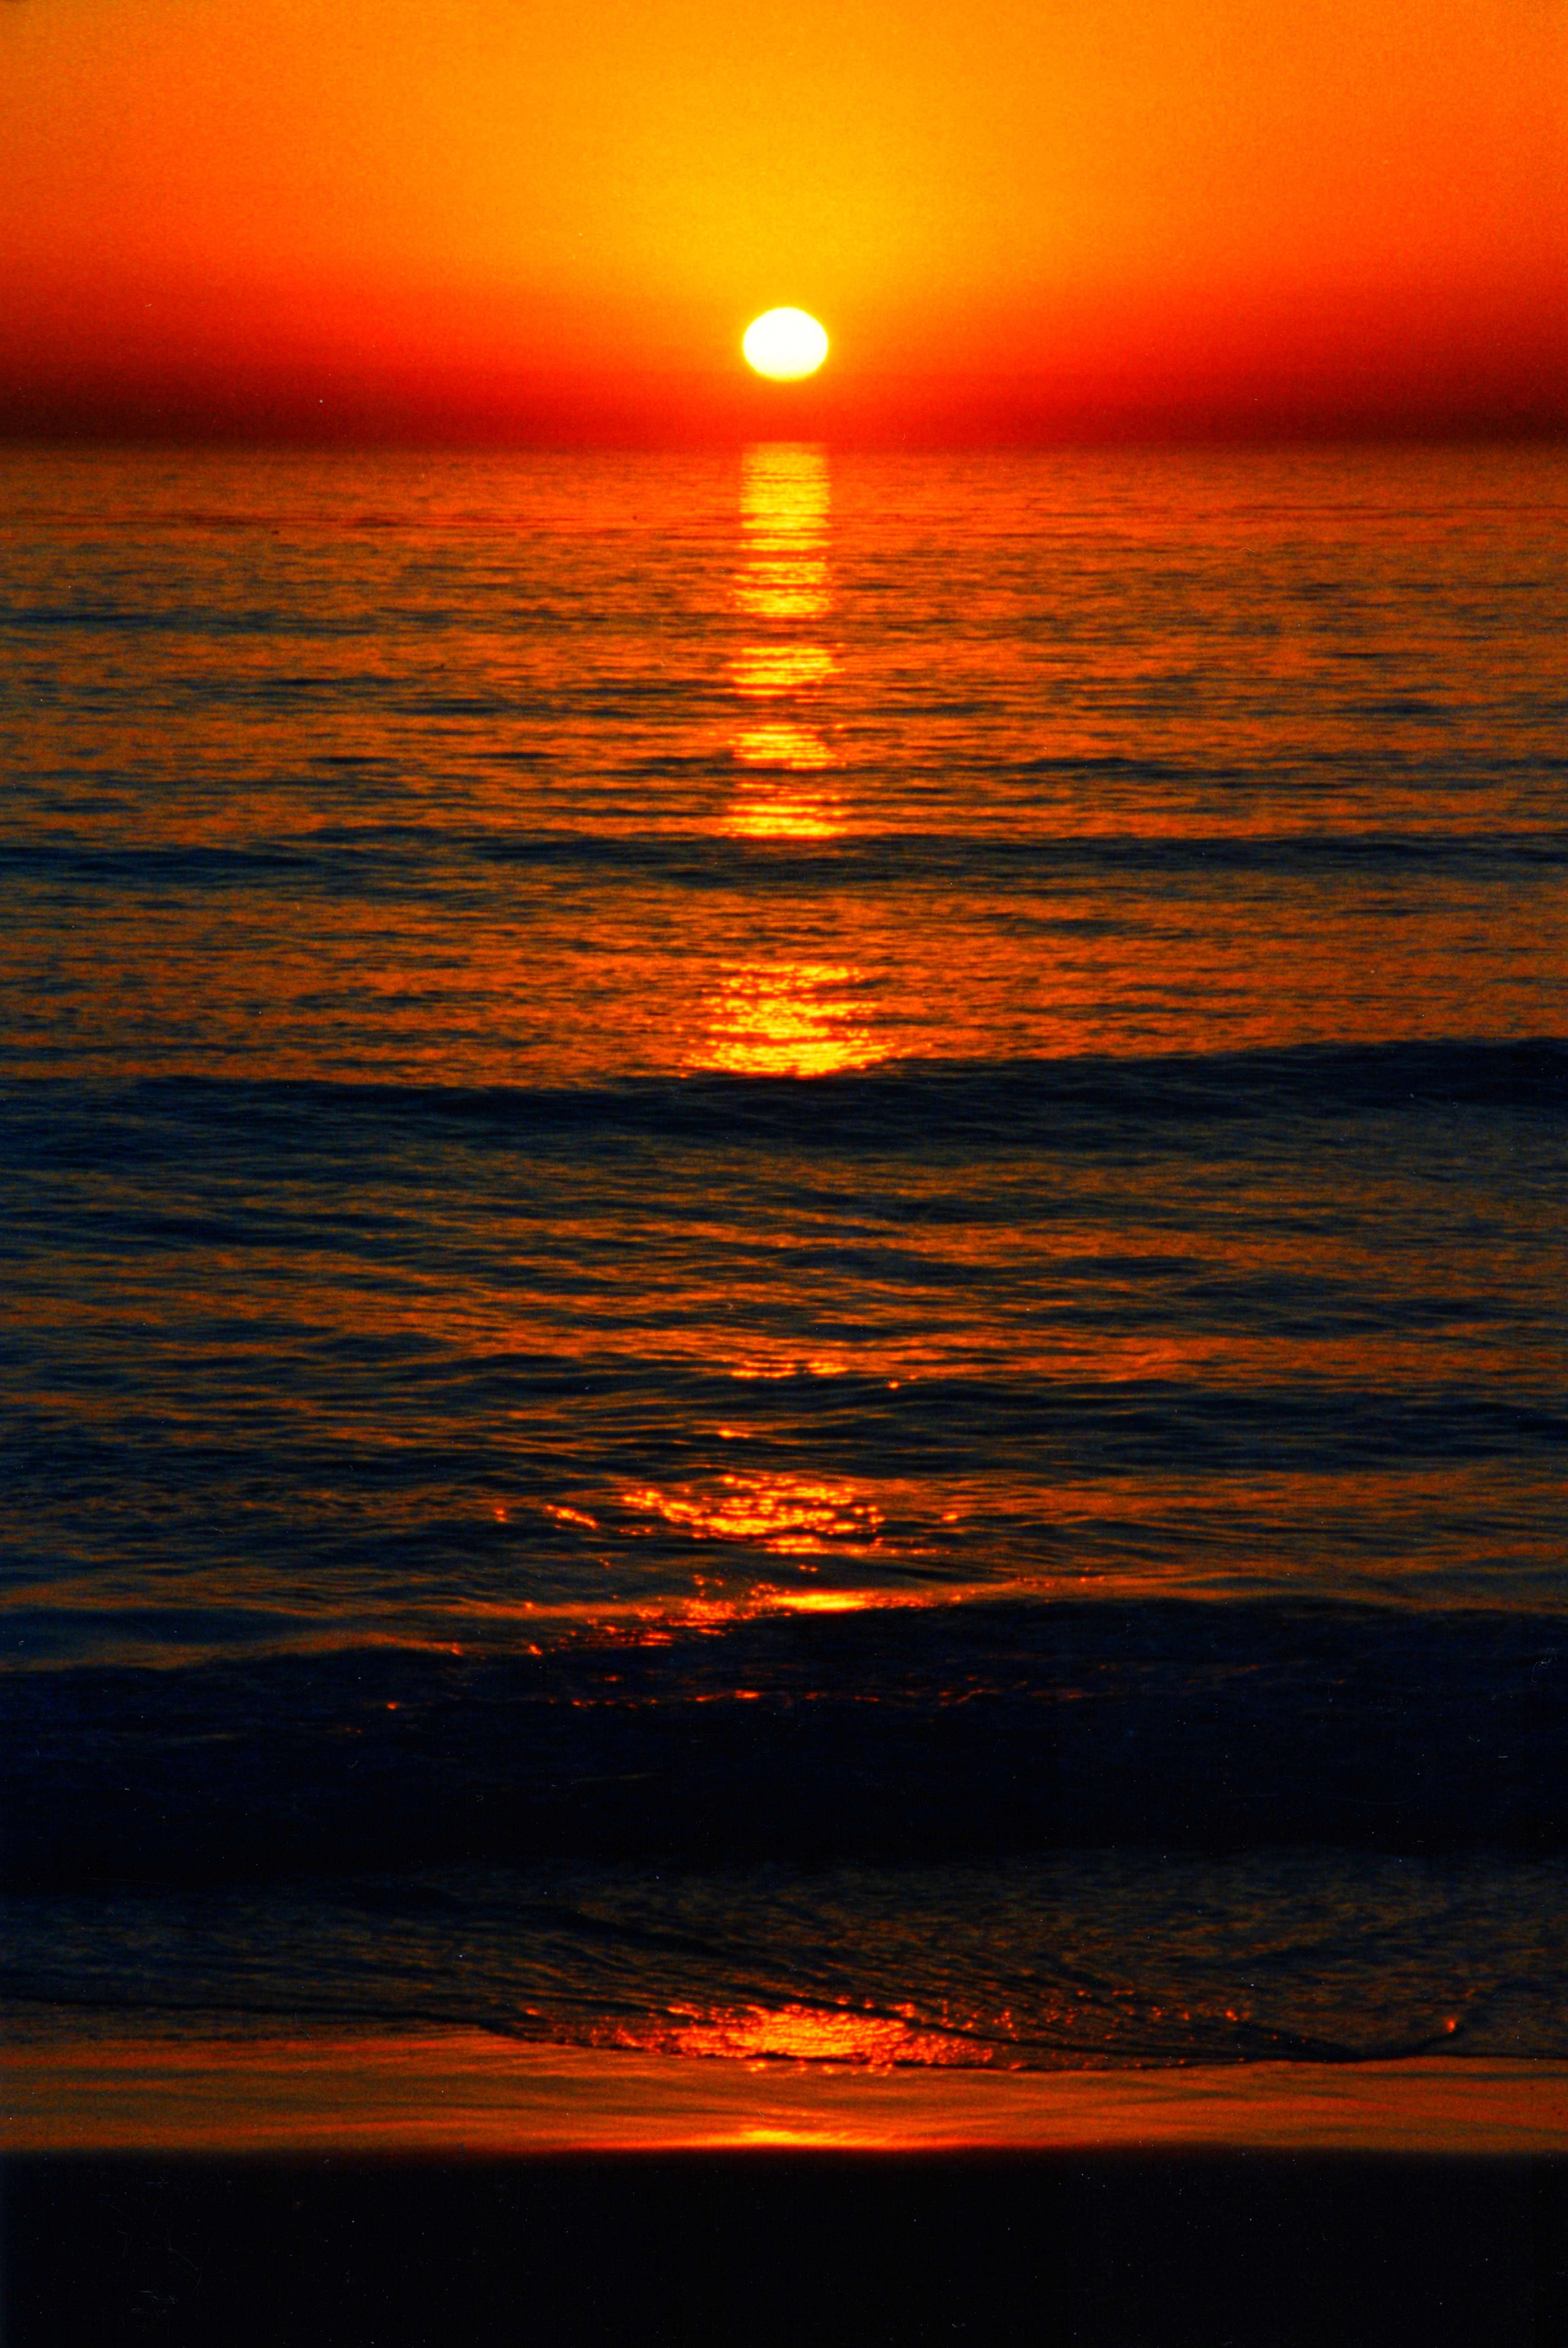 Sunset over the Ocean Seascape in San Diego, California image - Free